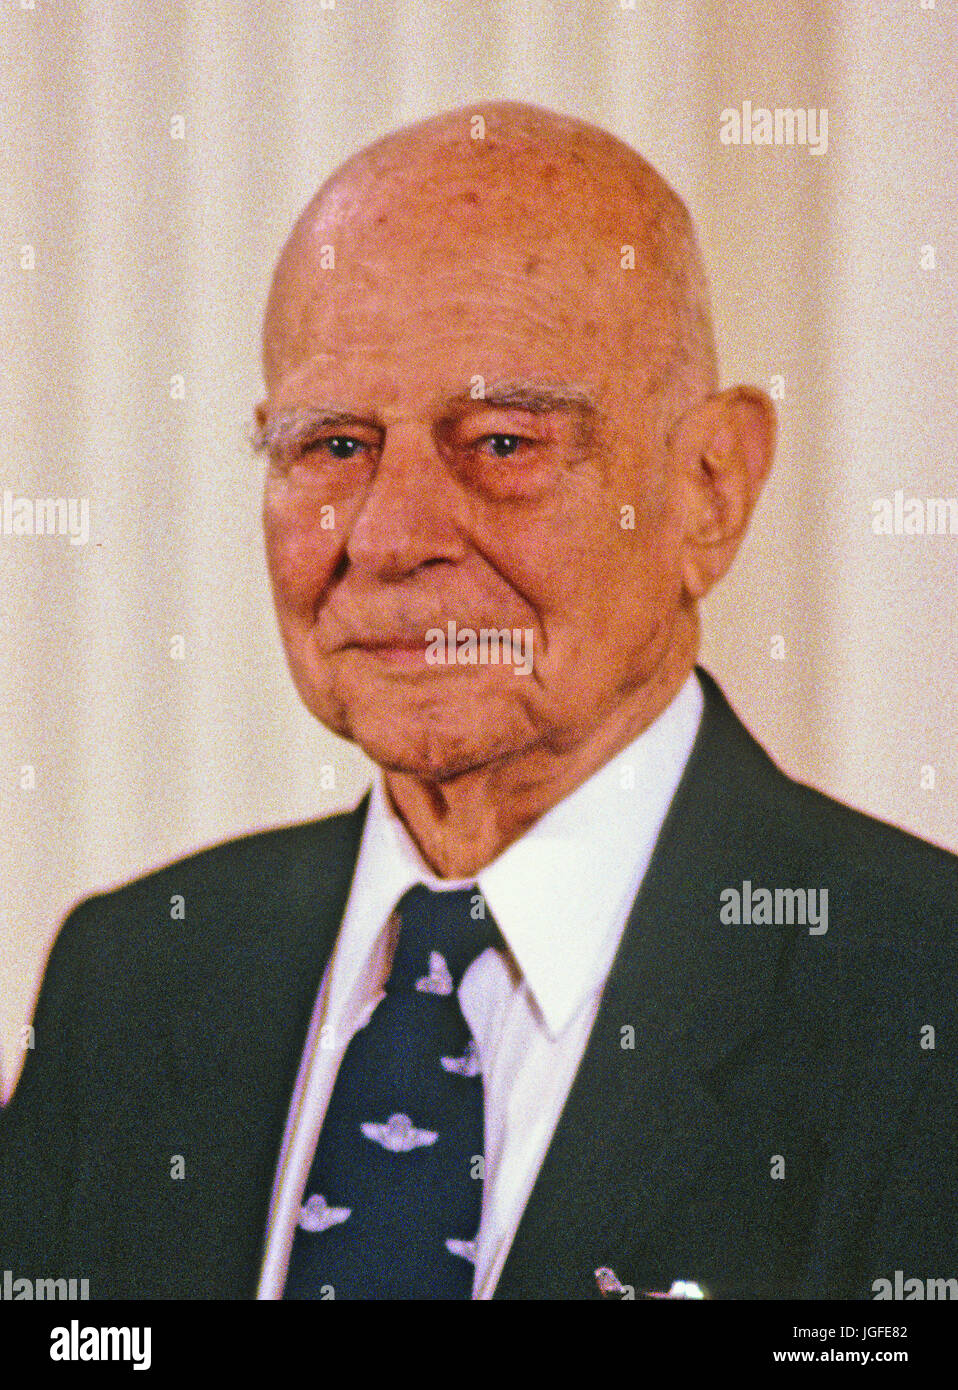 United States Air Force General Jimmy Doolittle is pictured during the ceremony where he is awarded the Presidential Medal of Freedom, the highest civilian award of the US, by US President George H.W. Bush and first lady Barbara Bush in the East Room of the White House in Washington, DC on July 6, 1989.  Doolittle was known for his development of instrument flying and for leading a 1942 air raid on Tokyo, Japan, for which he received the Medal of Honor. Credit: Ron Sachs / CNP /MediaPunch Stock Photo